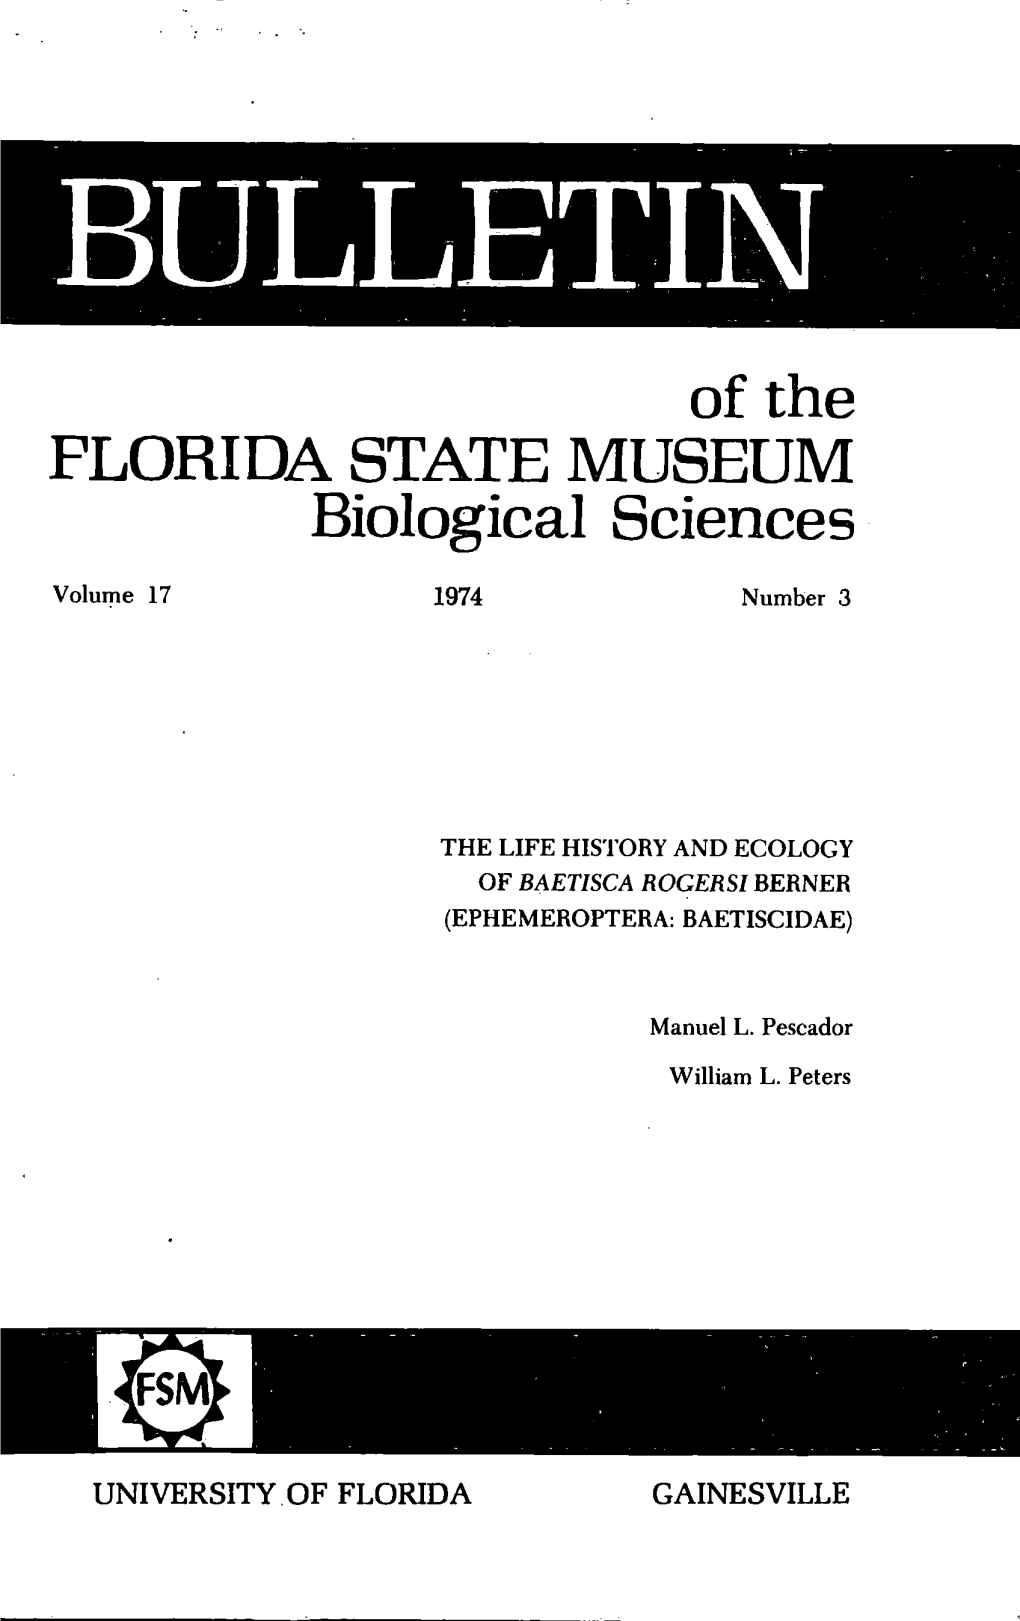 BULLETIN of the FLORIDA STATE MUSEUM Biological Sciences